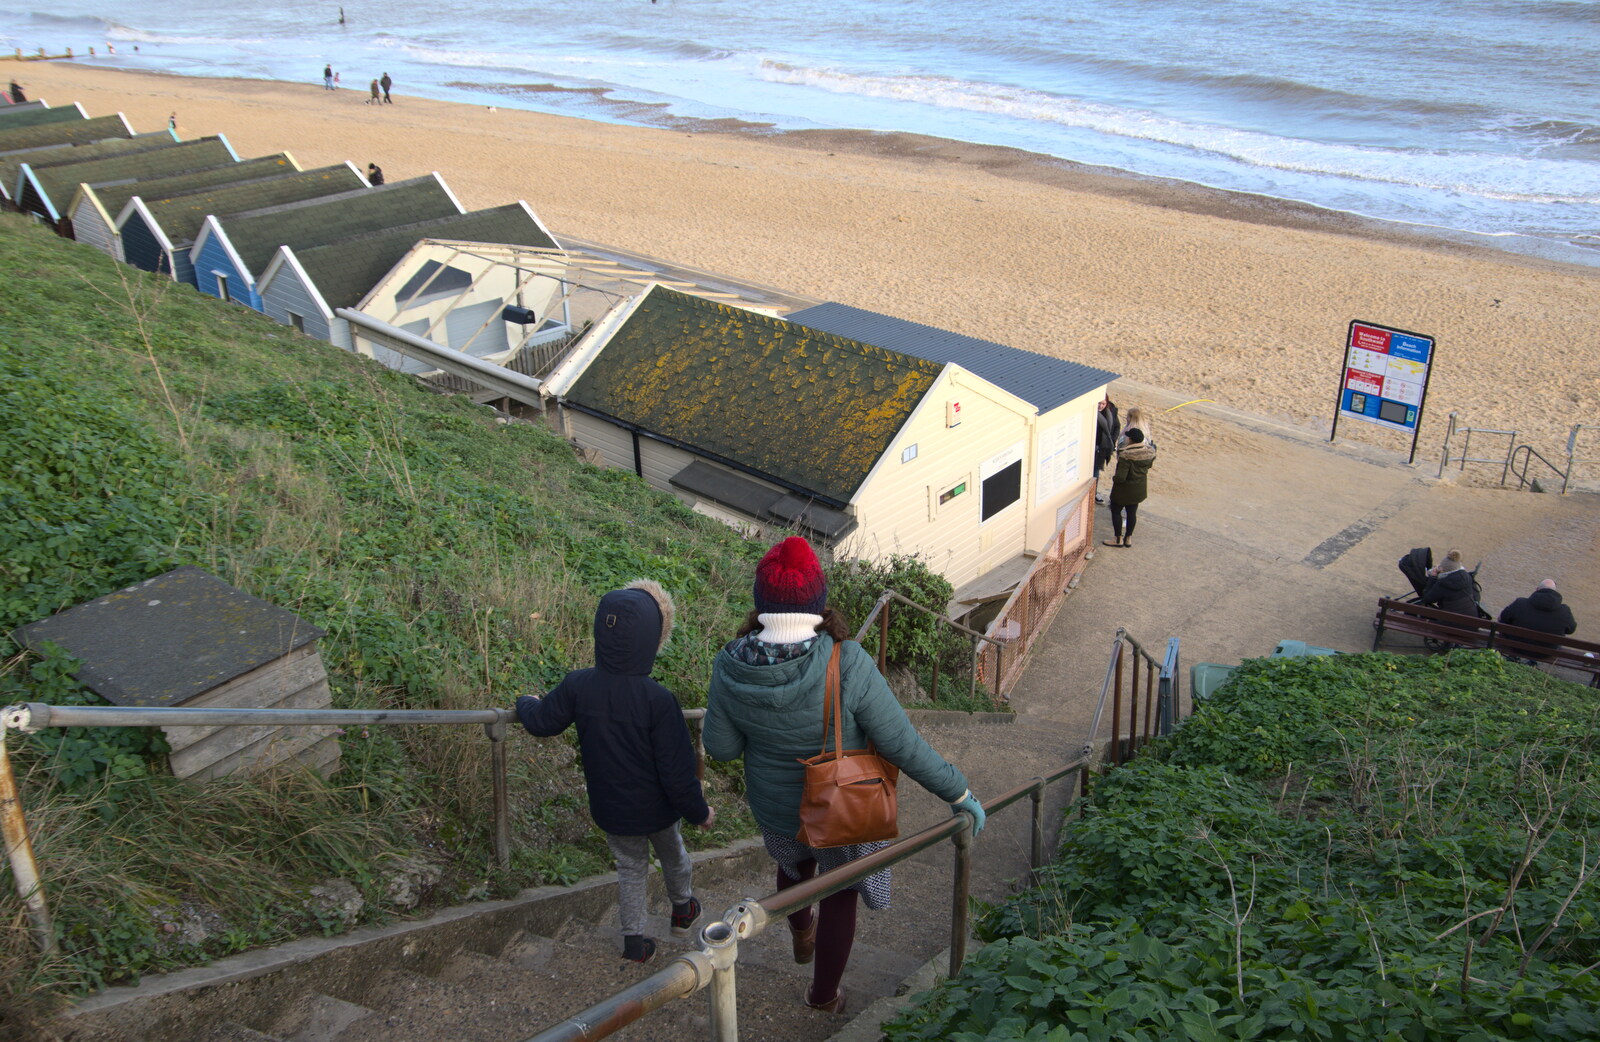 Down to the beach from A Return to the Beach, Southwold, Suffolk - 20th December 2020